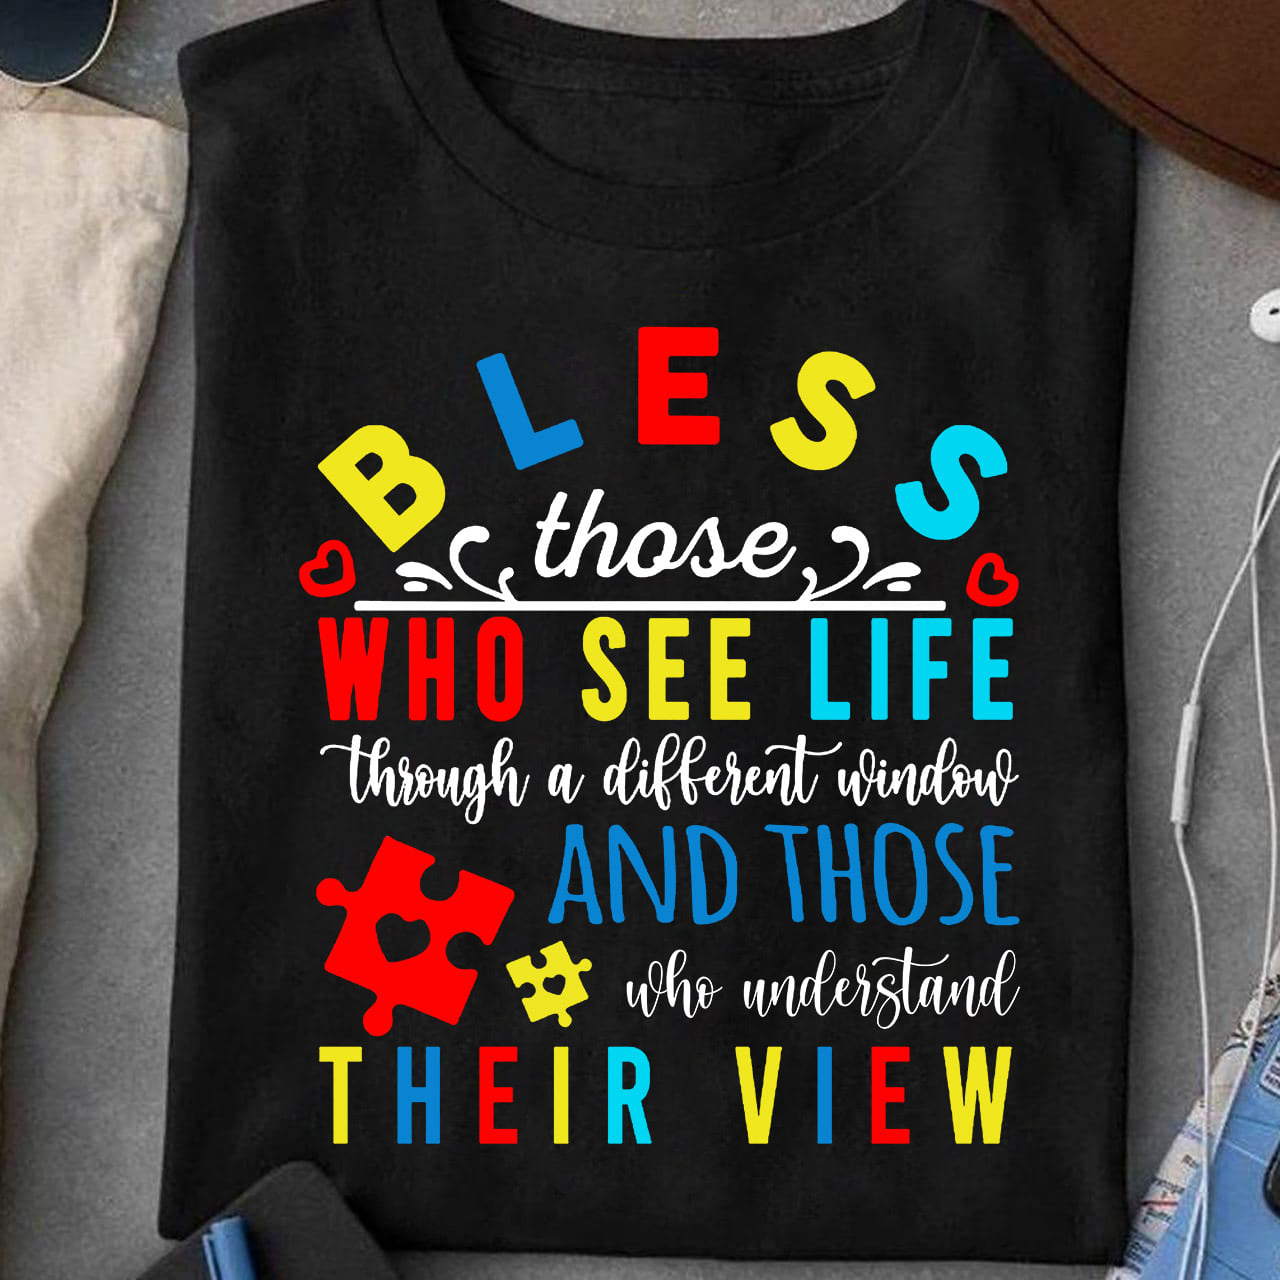 Bless those who see life through a different window - Autism awareness, autistic people